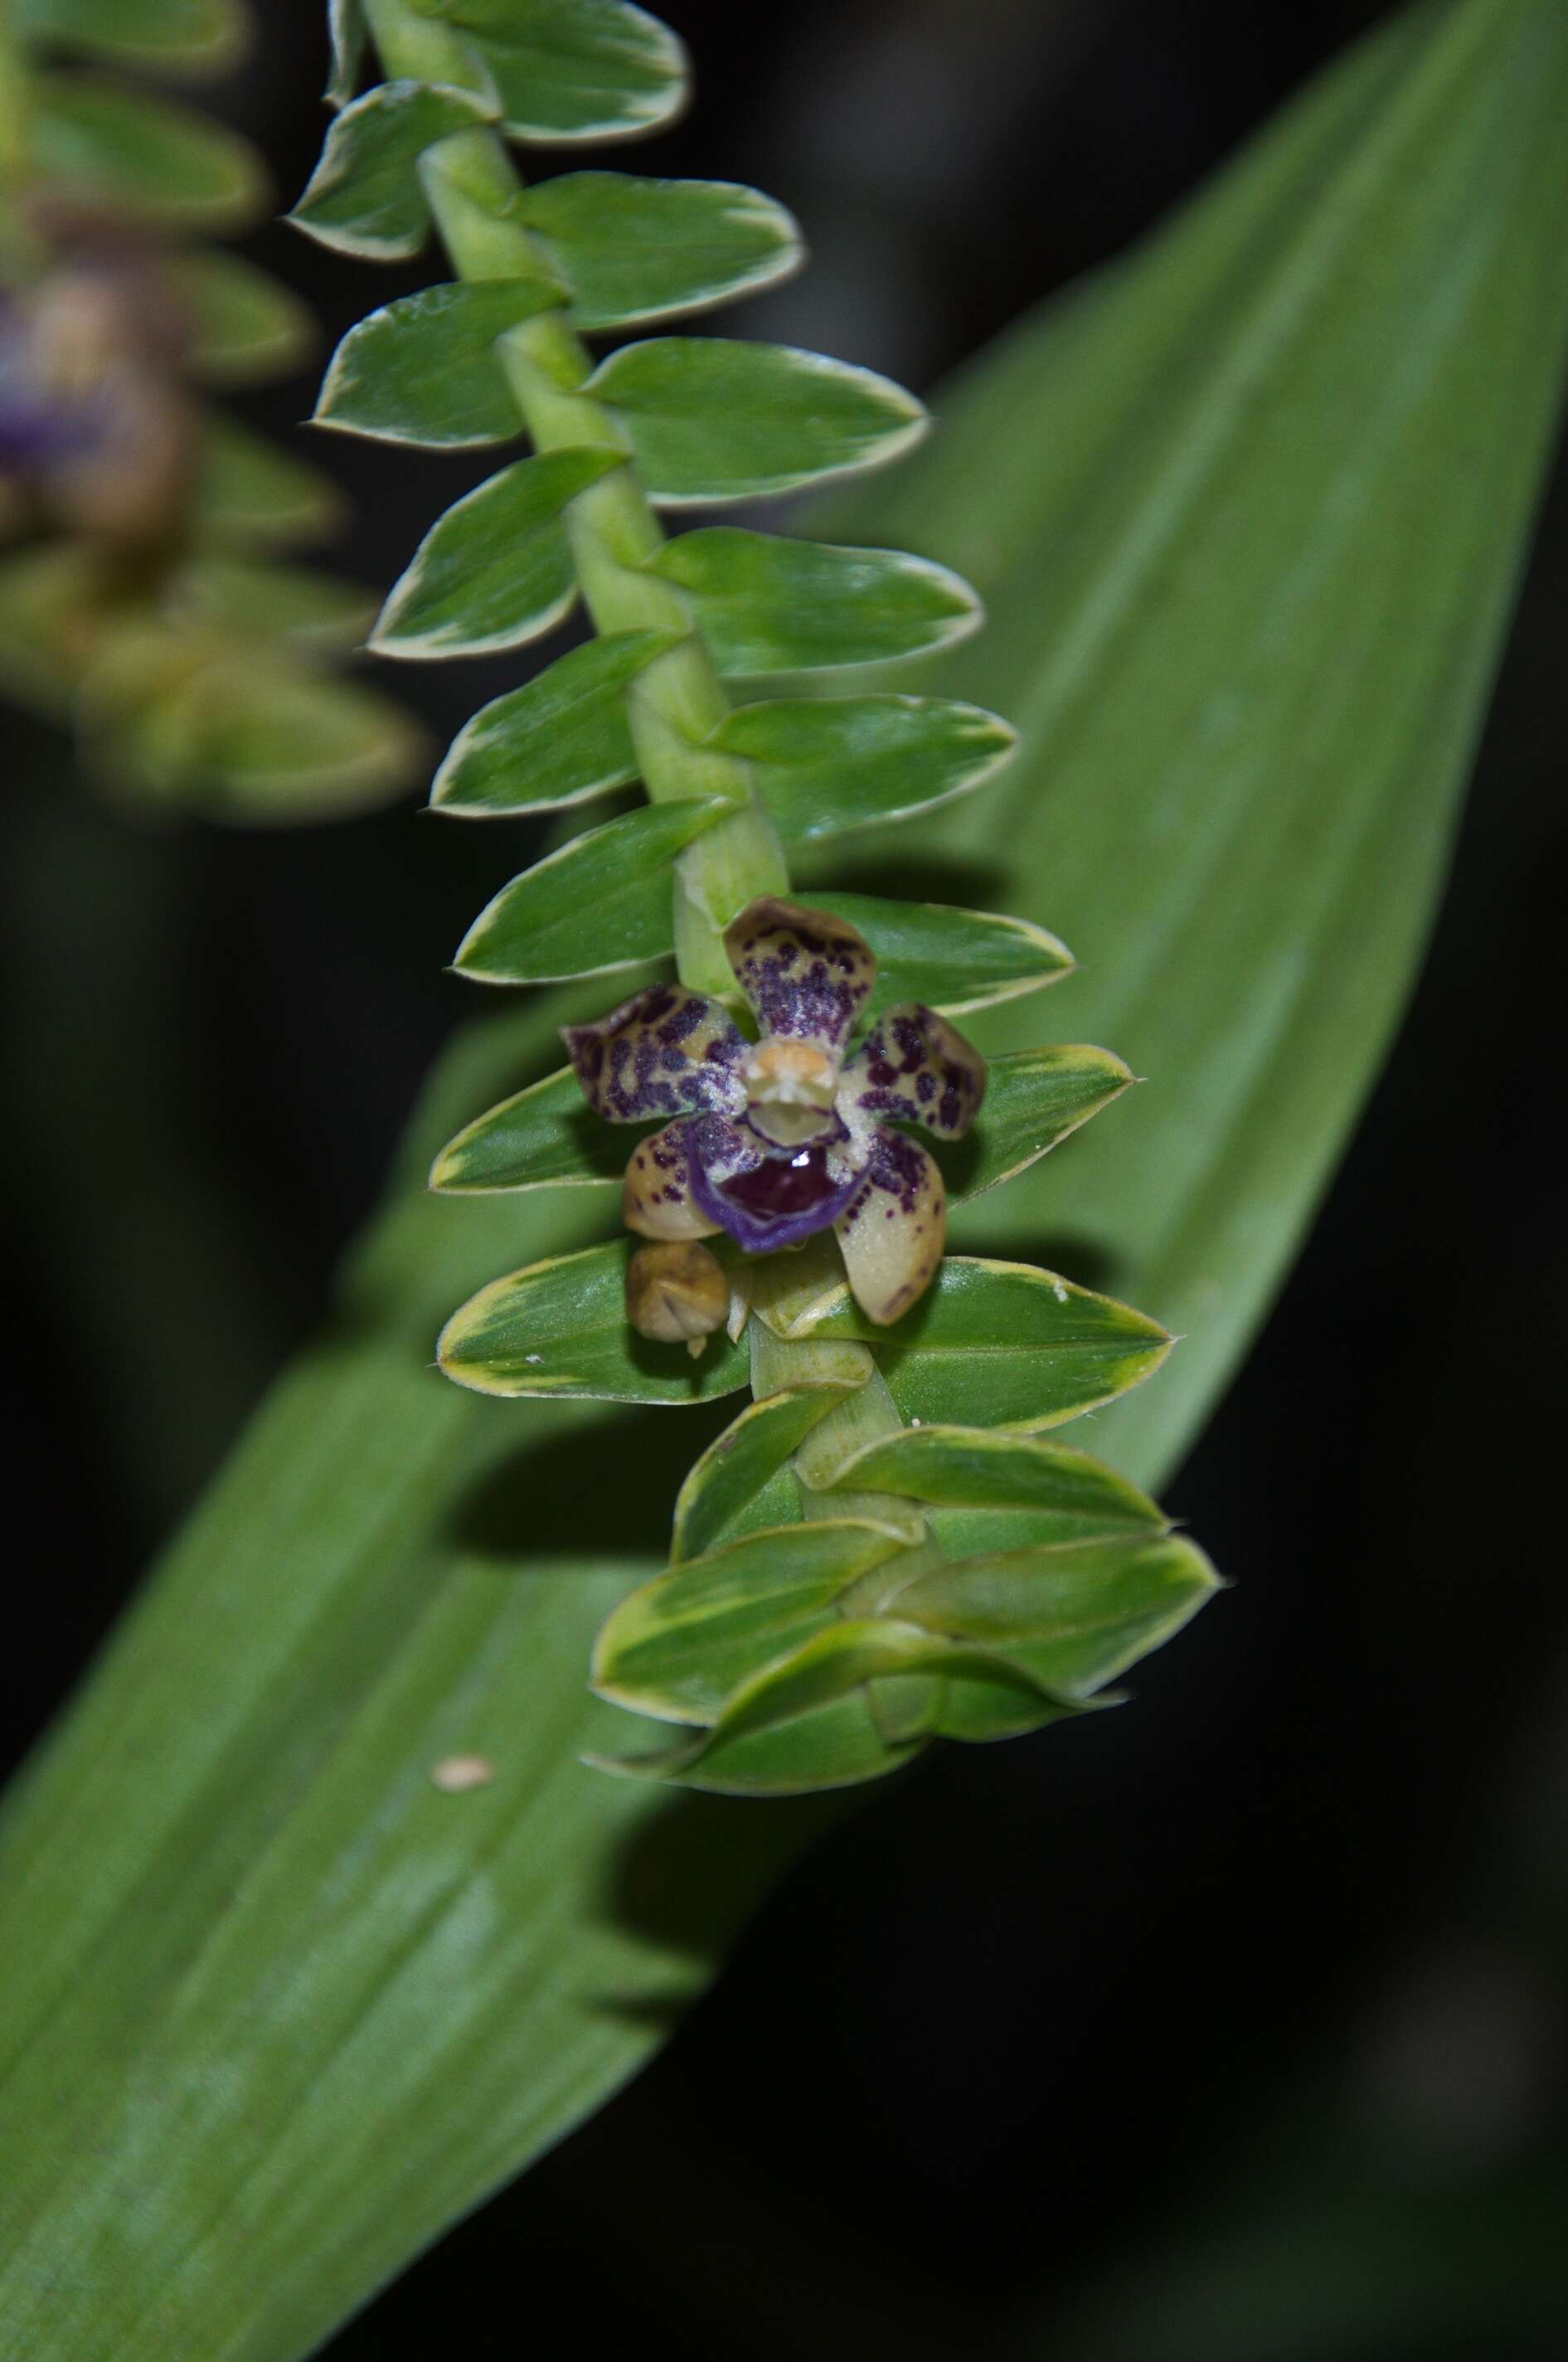 Image of Leafystem orchid